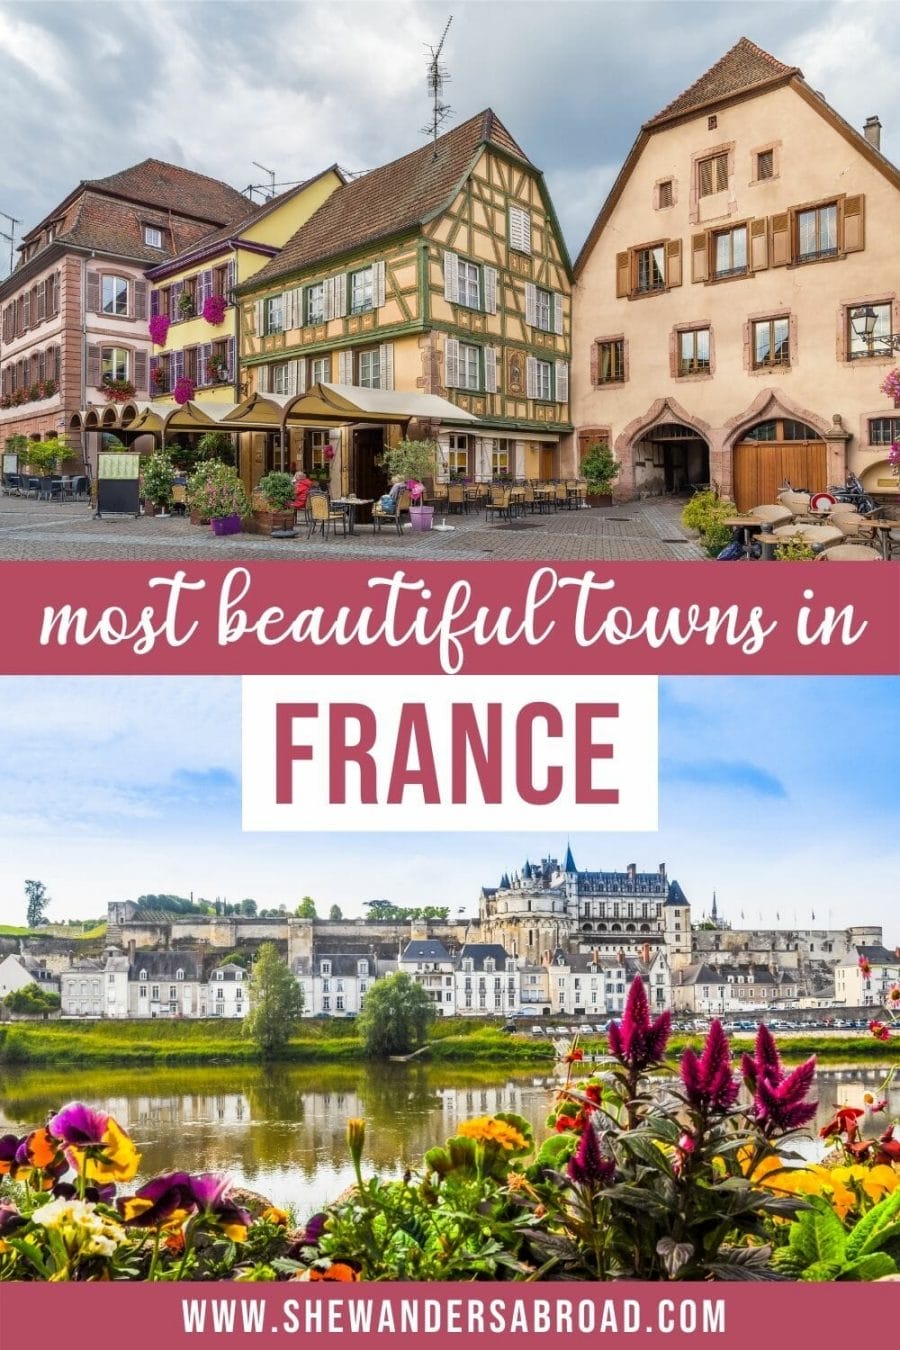 Magical Small Towns in France You Need to See to Believe